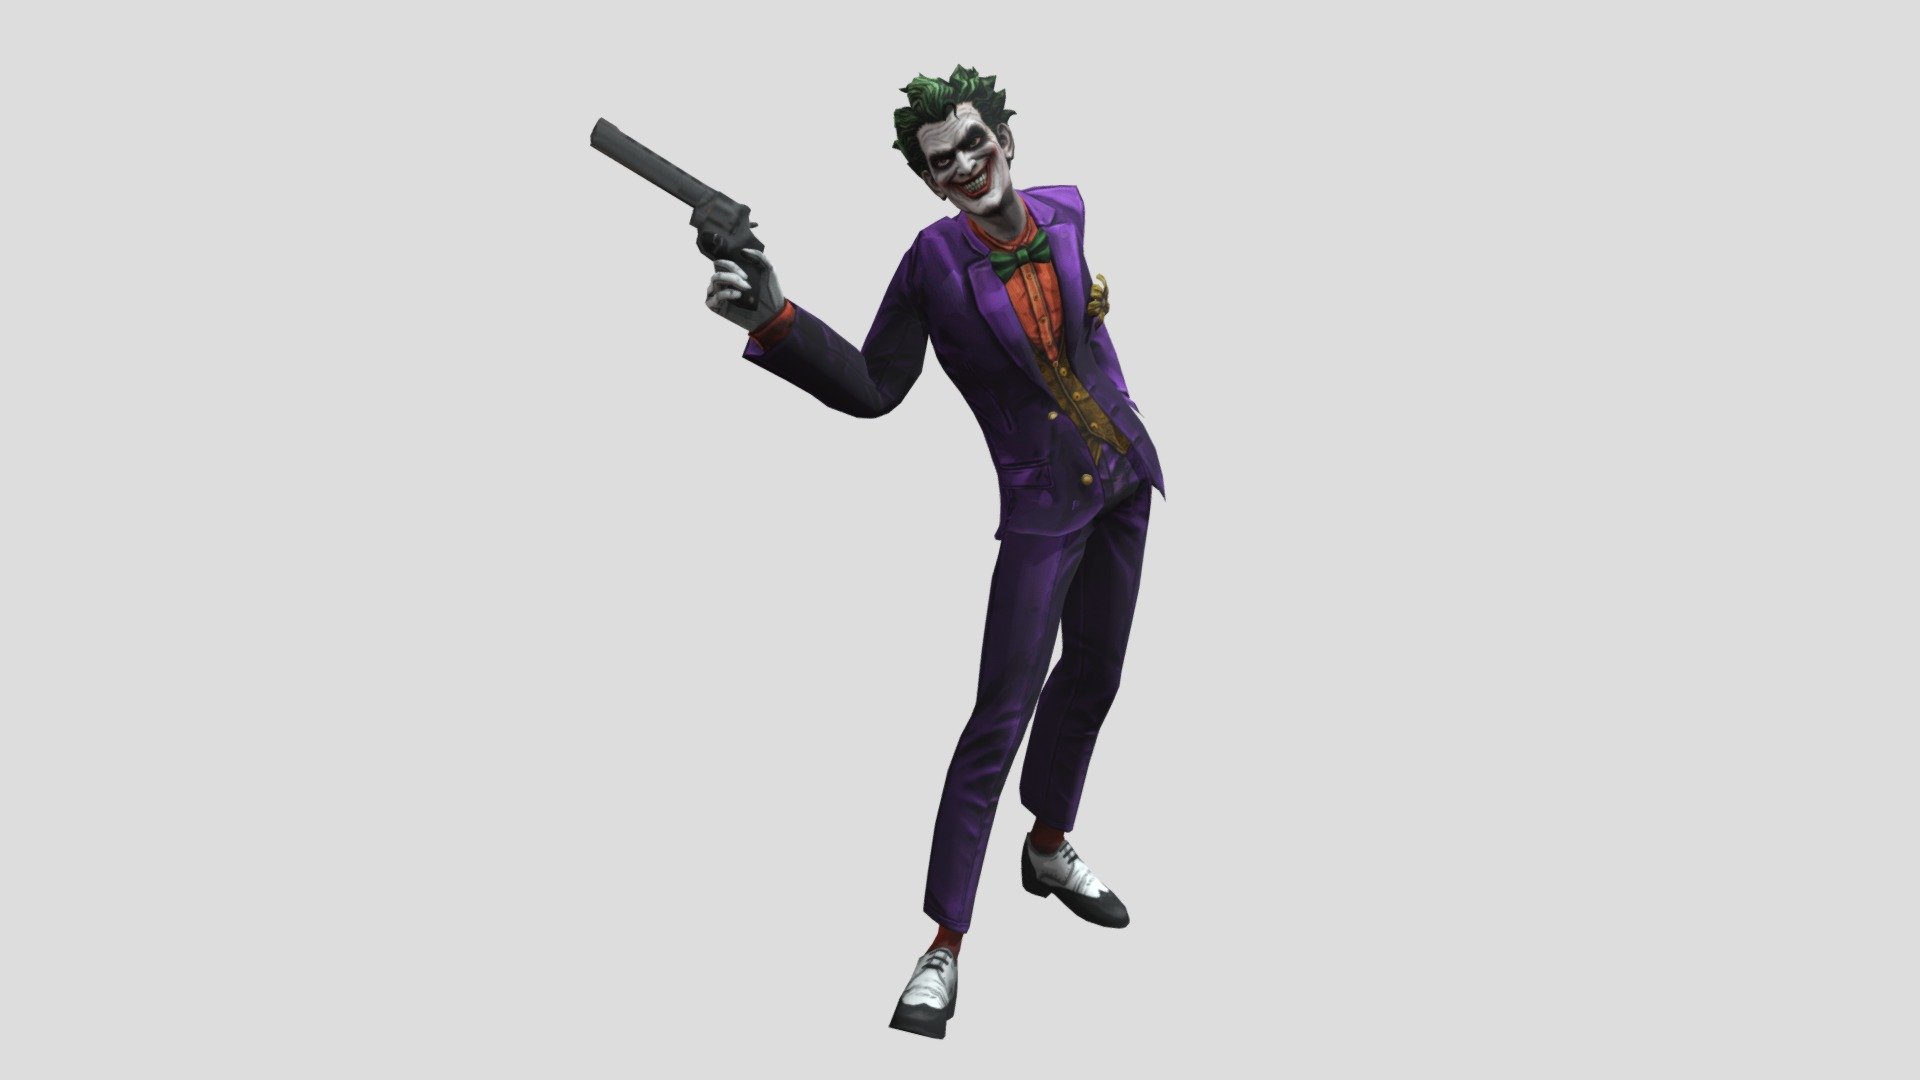 Join Telegram : https://t.me/CAPTAAINROFFICIAL1

YouTube Link : https://youtube.com/@BELORSE

This Is 3d Model OF Joker It is Well Textured And Rigged You can Download It And Can Use On Your Animations.

My Gmail : captaainr@gmail.com

👉Visit Other Channel : sketchfab.com/CAPTAAINRO - Joker (Textured) (Rigged) - Download Free 3D model by CAPTAAINR 3d model